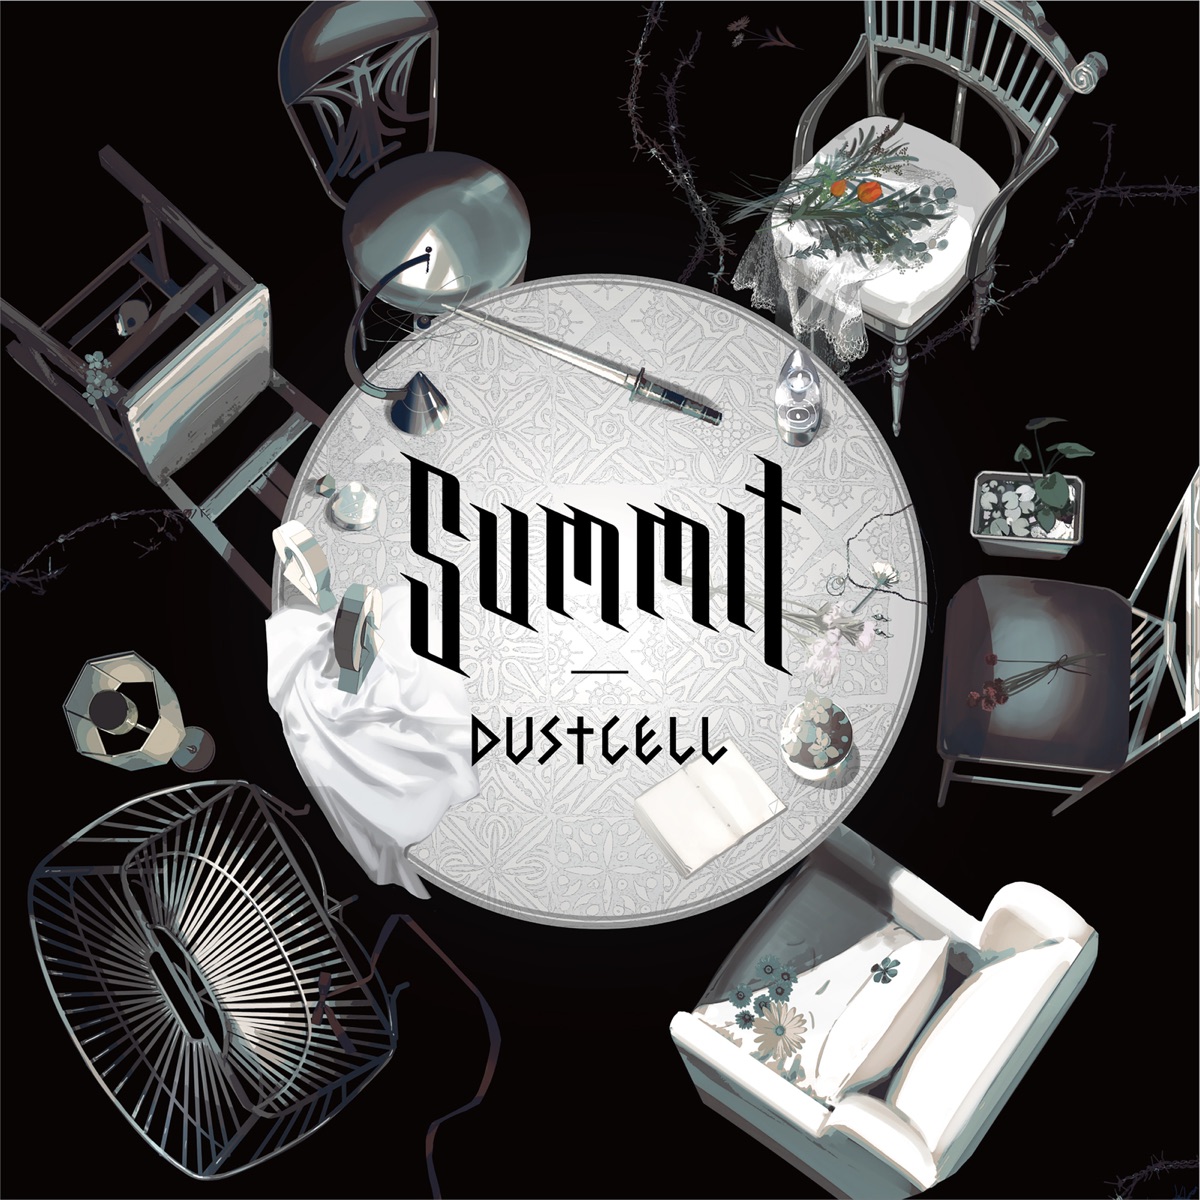 Cover for『DUSTCELL - SOIREE』from the release『SUMMIT』